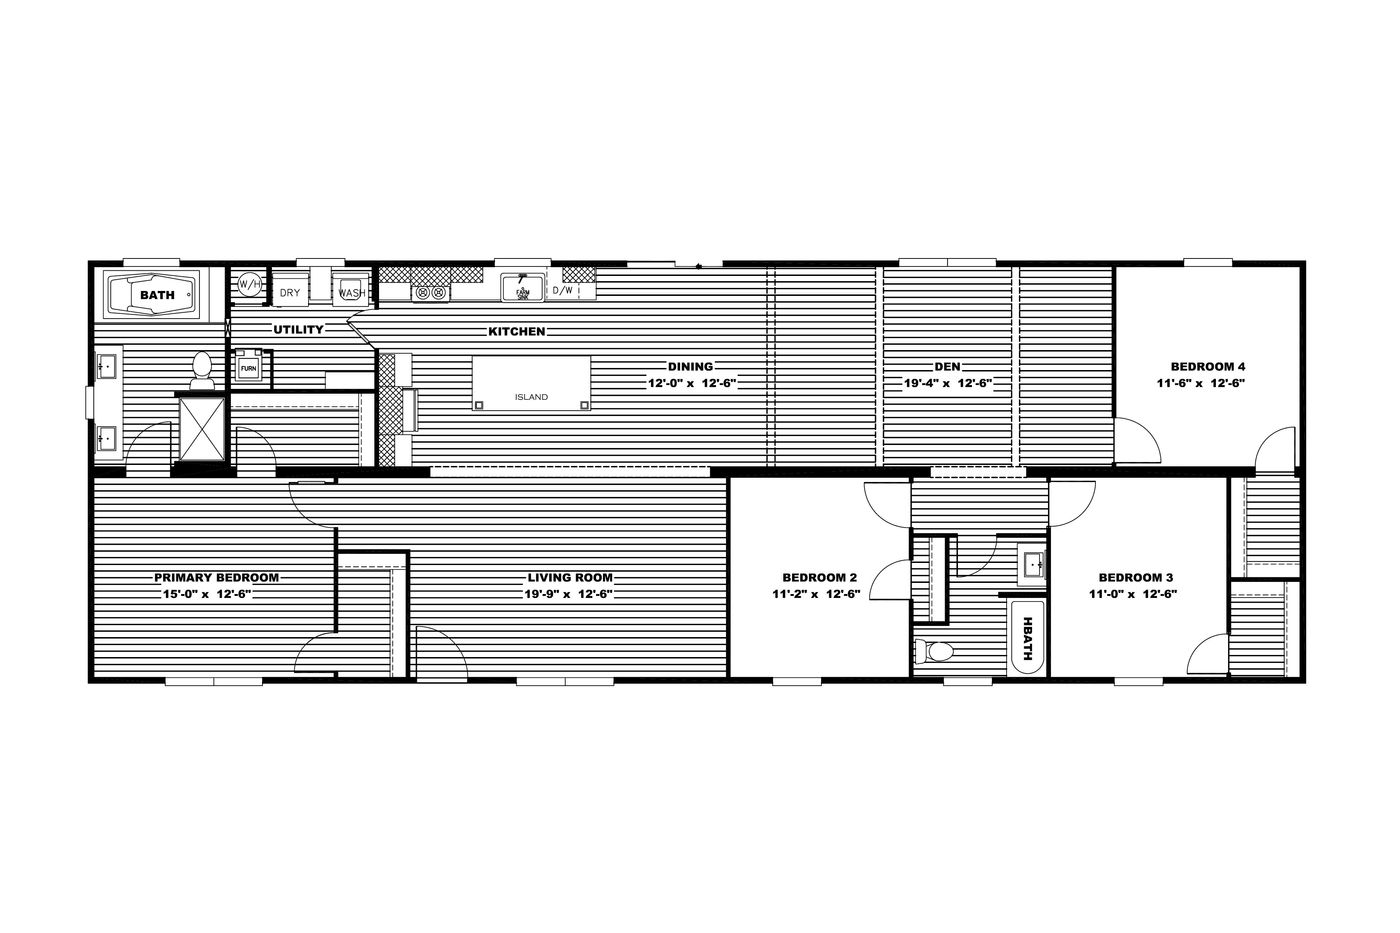 The FARMHOUSE 4 Floor Plan. This Manufactured Mobile Home features 4 bedrooms and 2 baths.